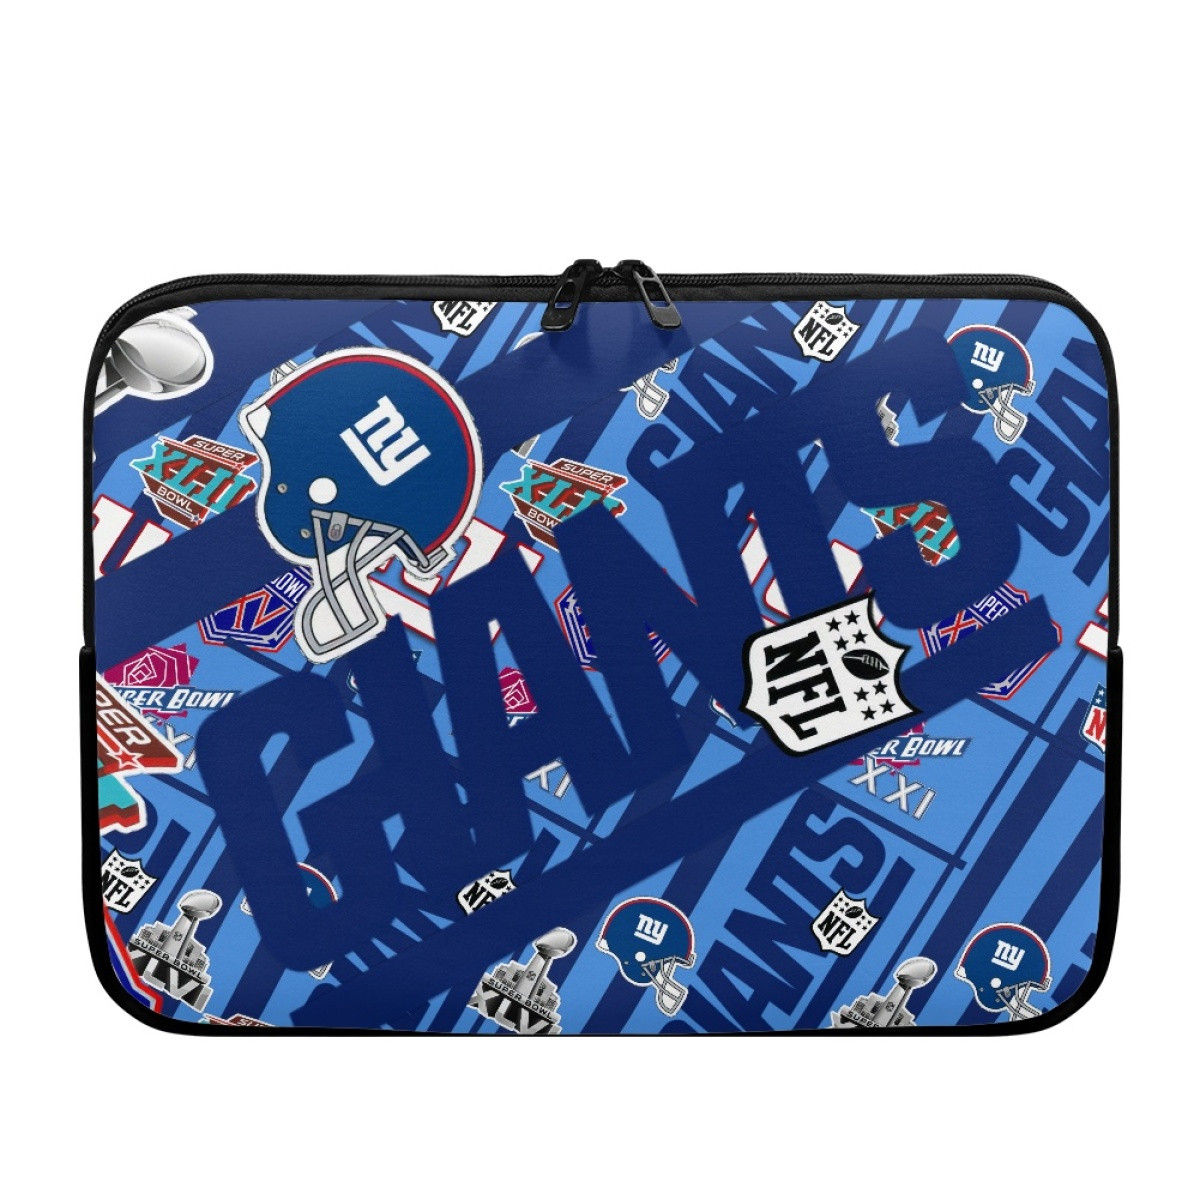 NFL New York Giants Laptop Sleeve Carrying Case For 10 12 13 15 17 Inch Notebook - New York Giants Super Bowl Championship Mania Collage Logo